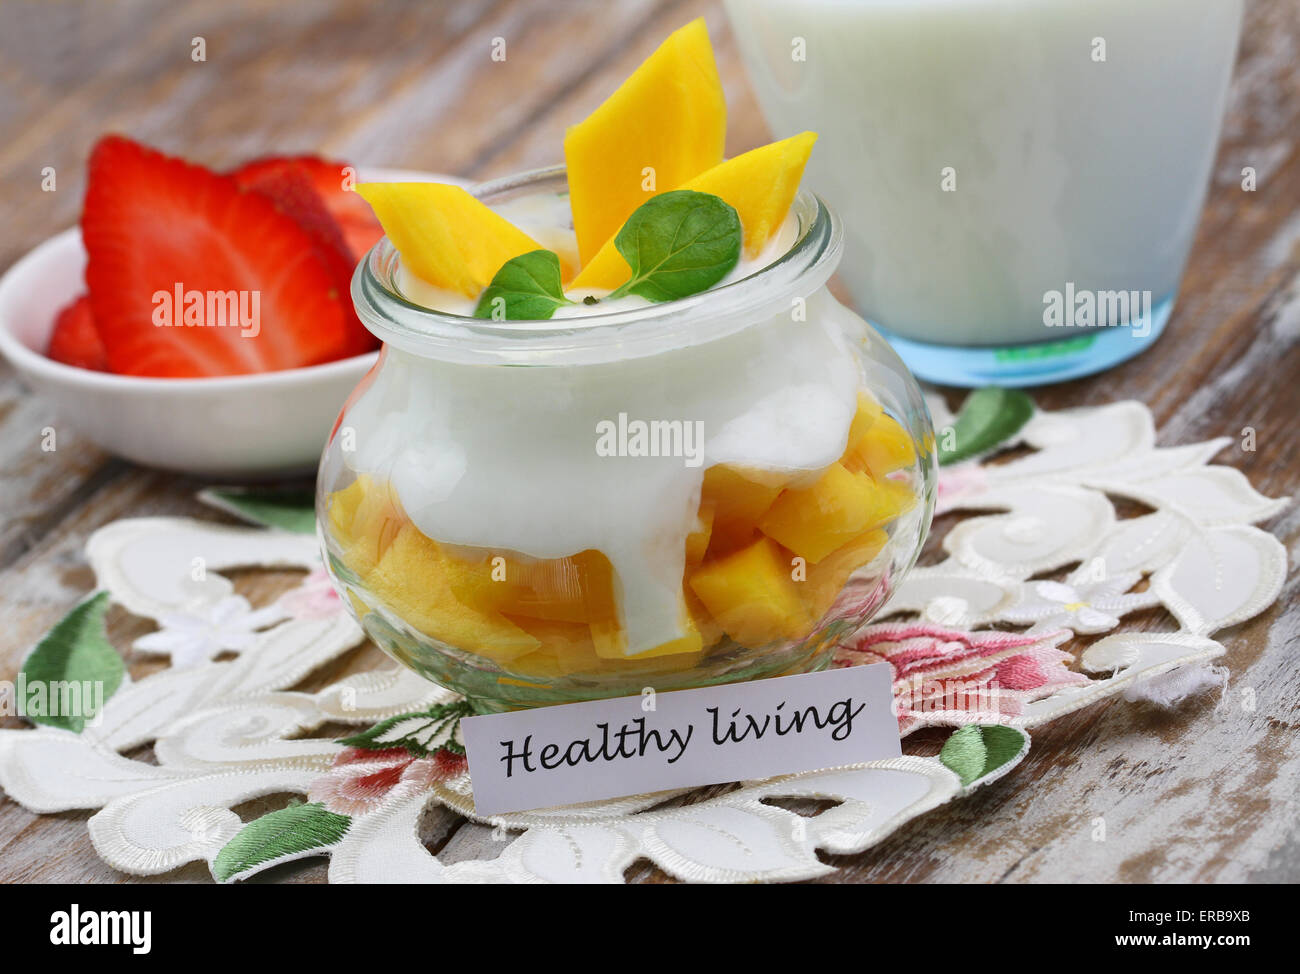 Healthy living card with mango yoghurt, strawberries and milk Stock Photo